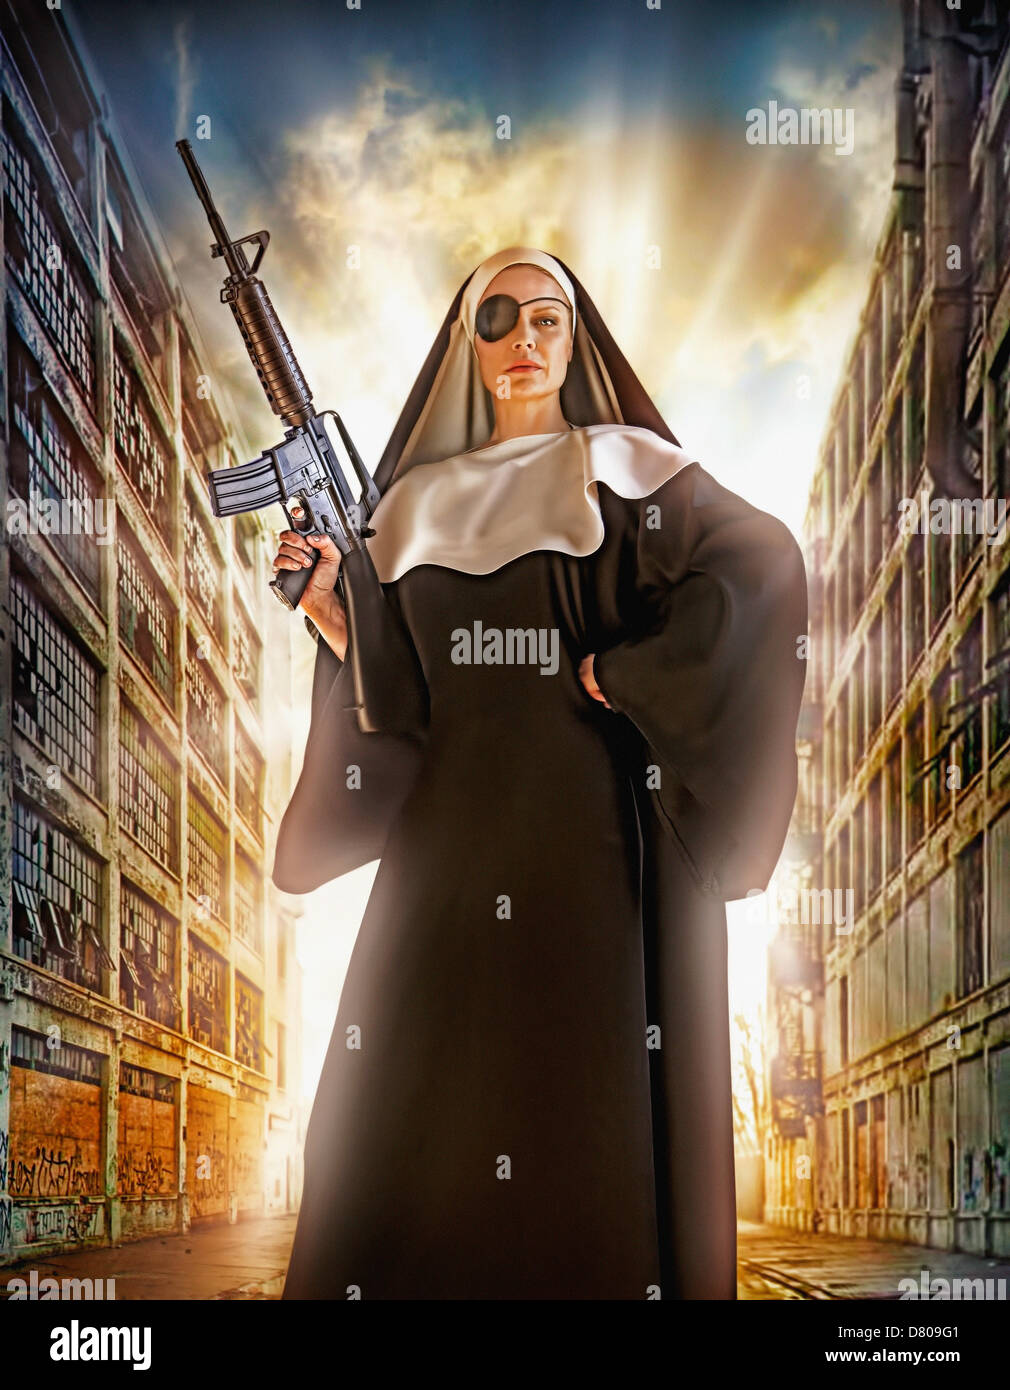 Illustration of Caucasian nun with eye patch and machine gun Stock Photo